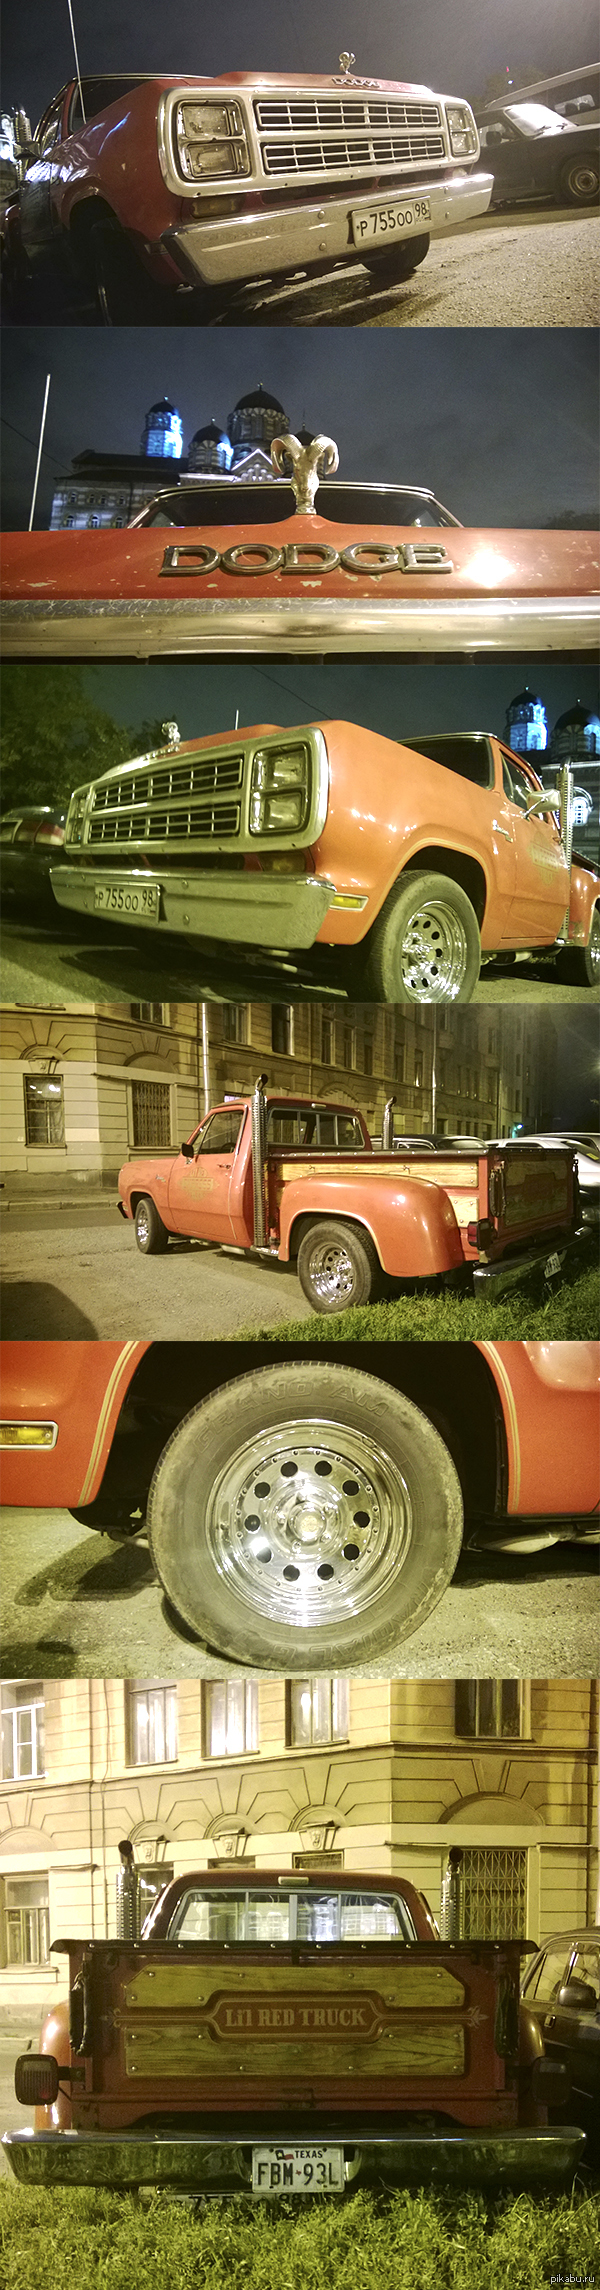 Dodge Lil' Red Express(1978)     ,       ,   .   ,    :)